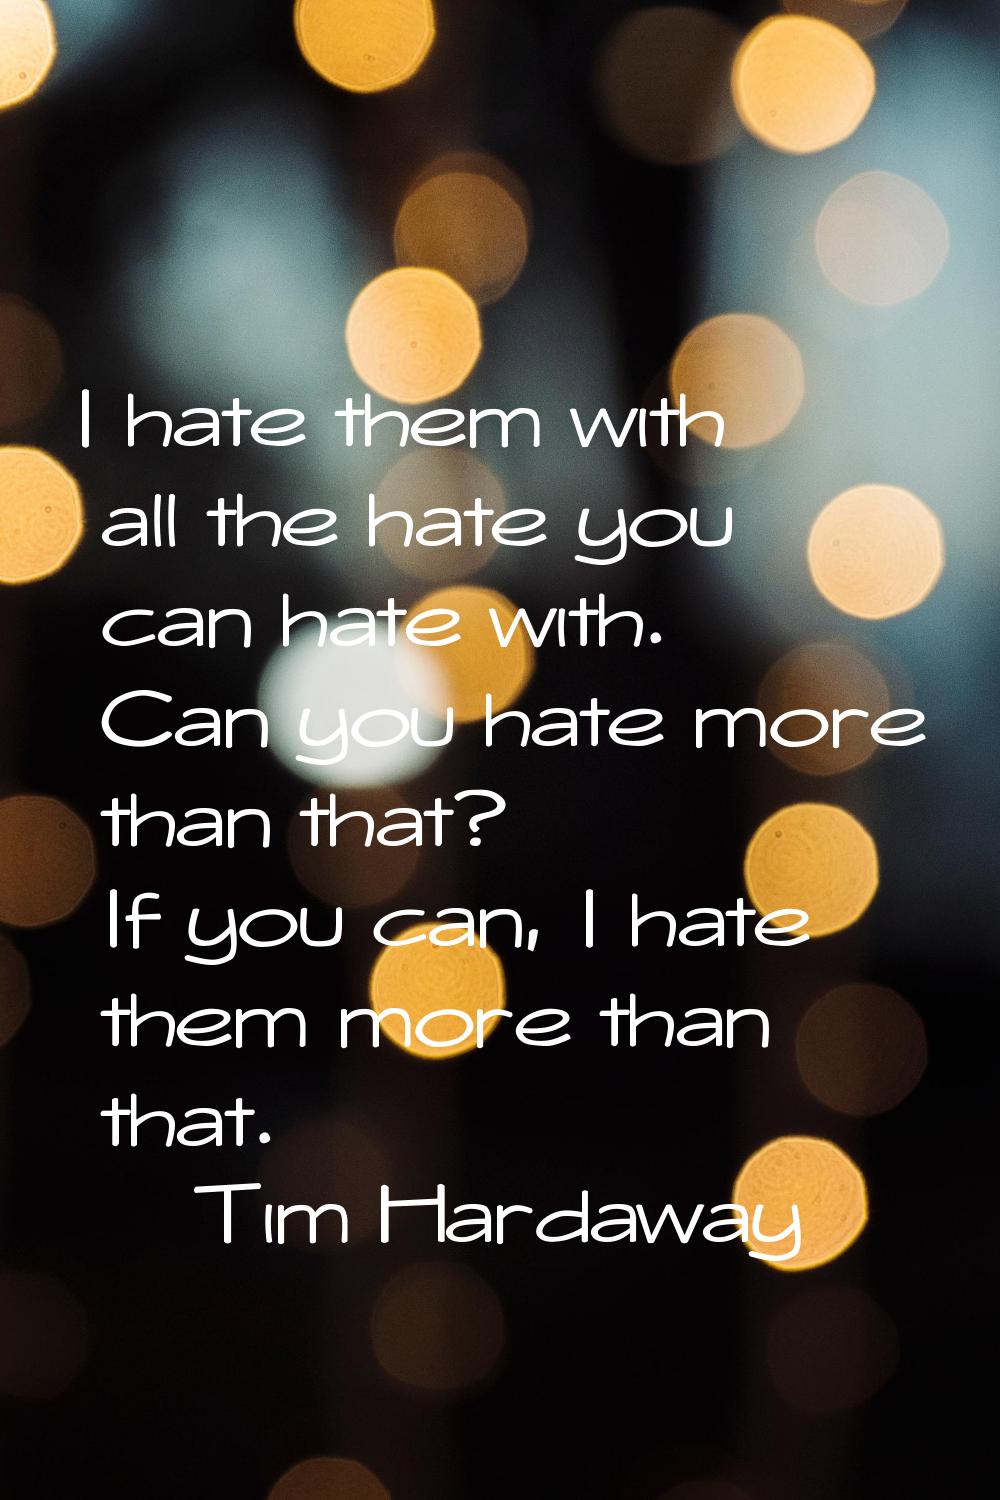 I hate them with all the hate you can hate with. Can you hate more than that? If you can, I hate th